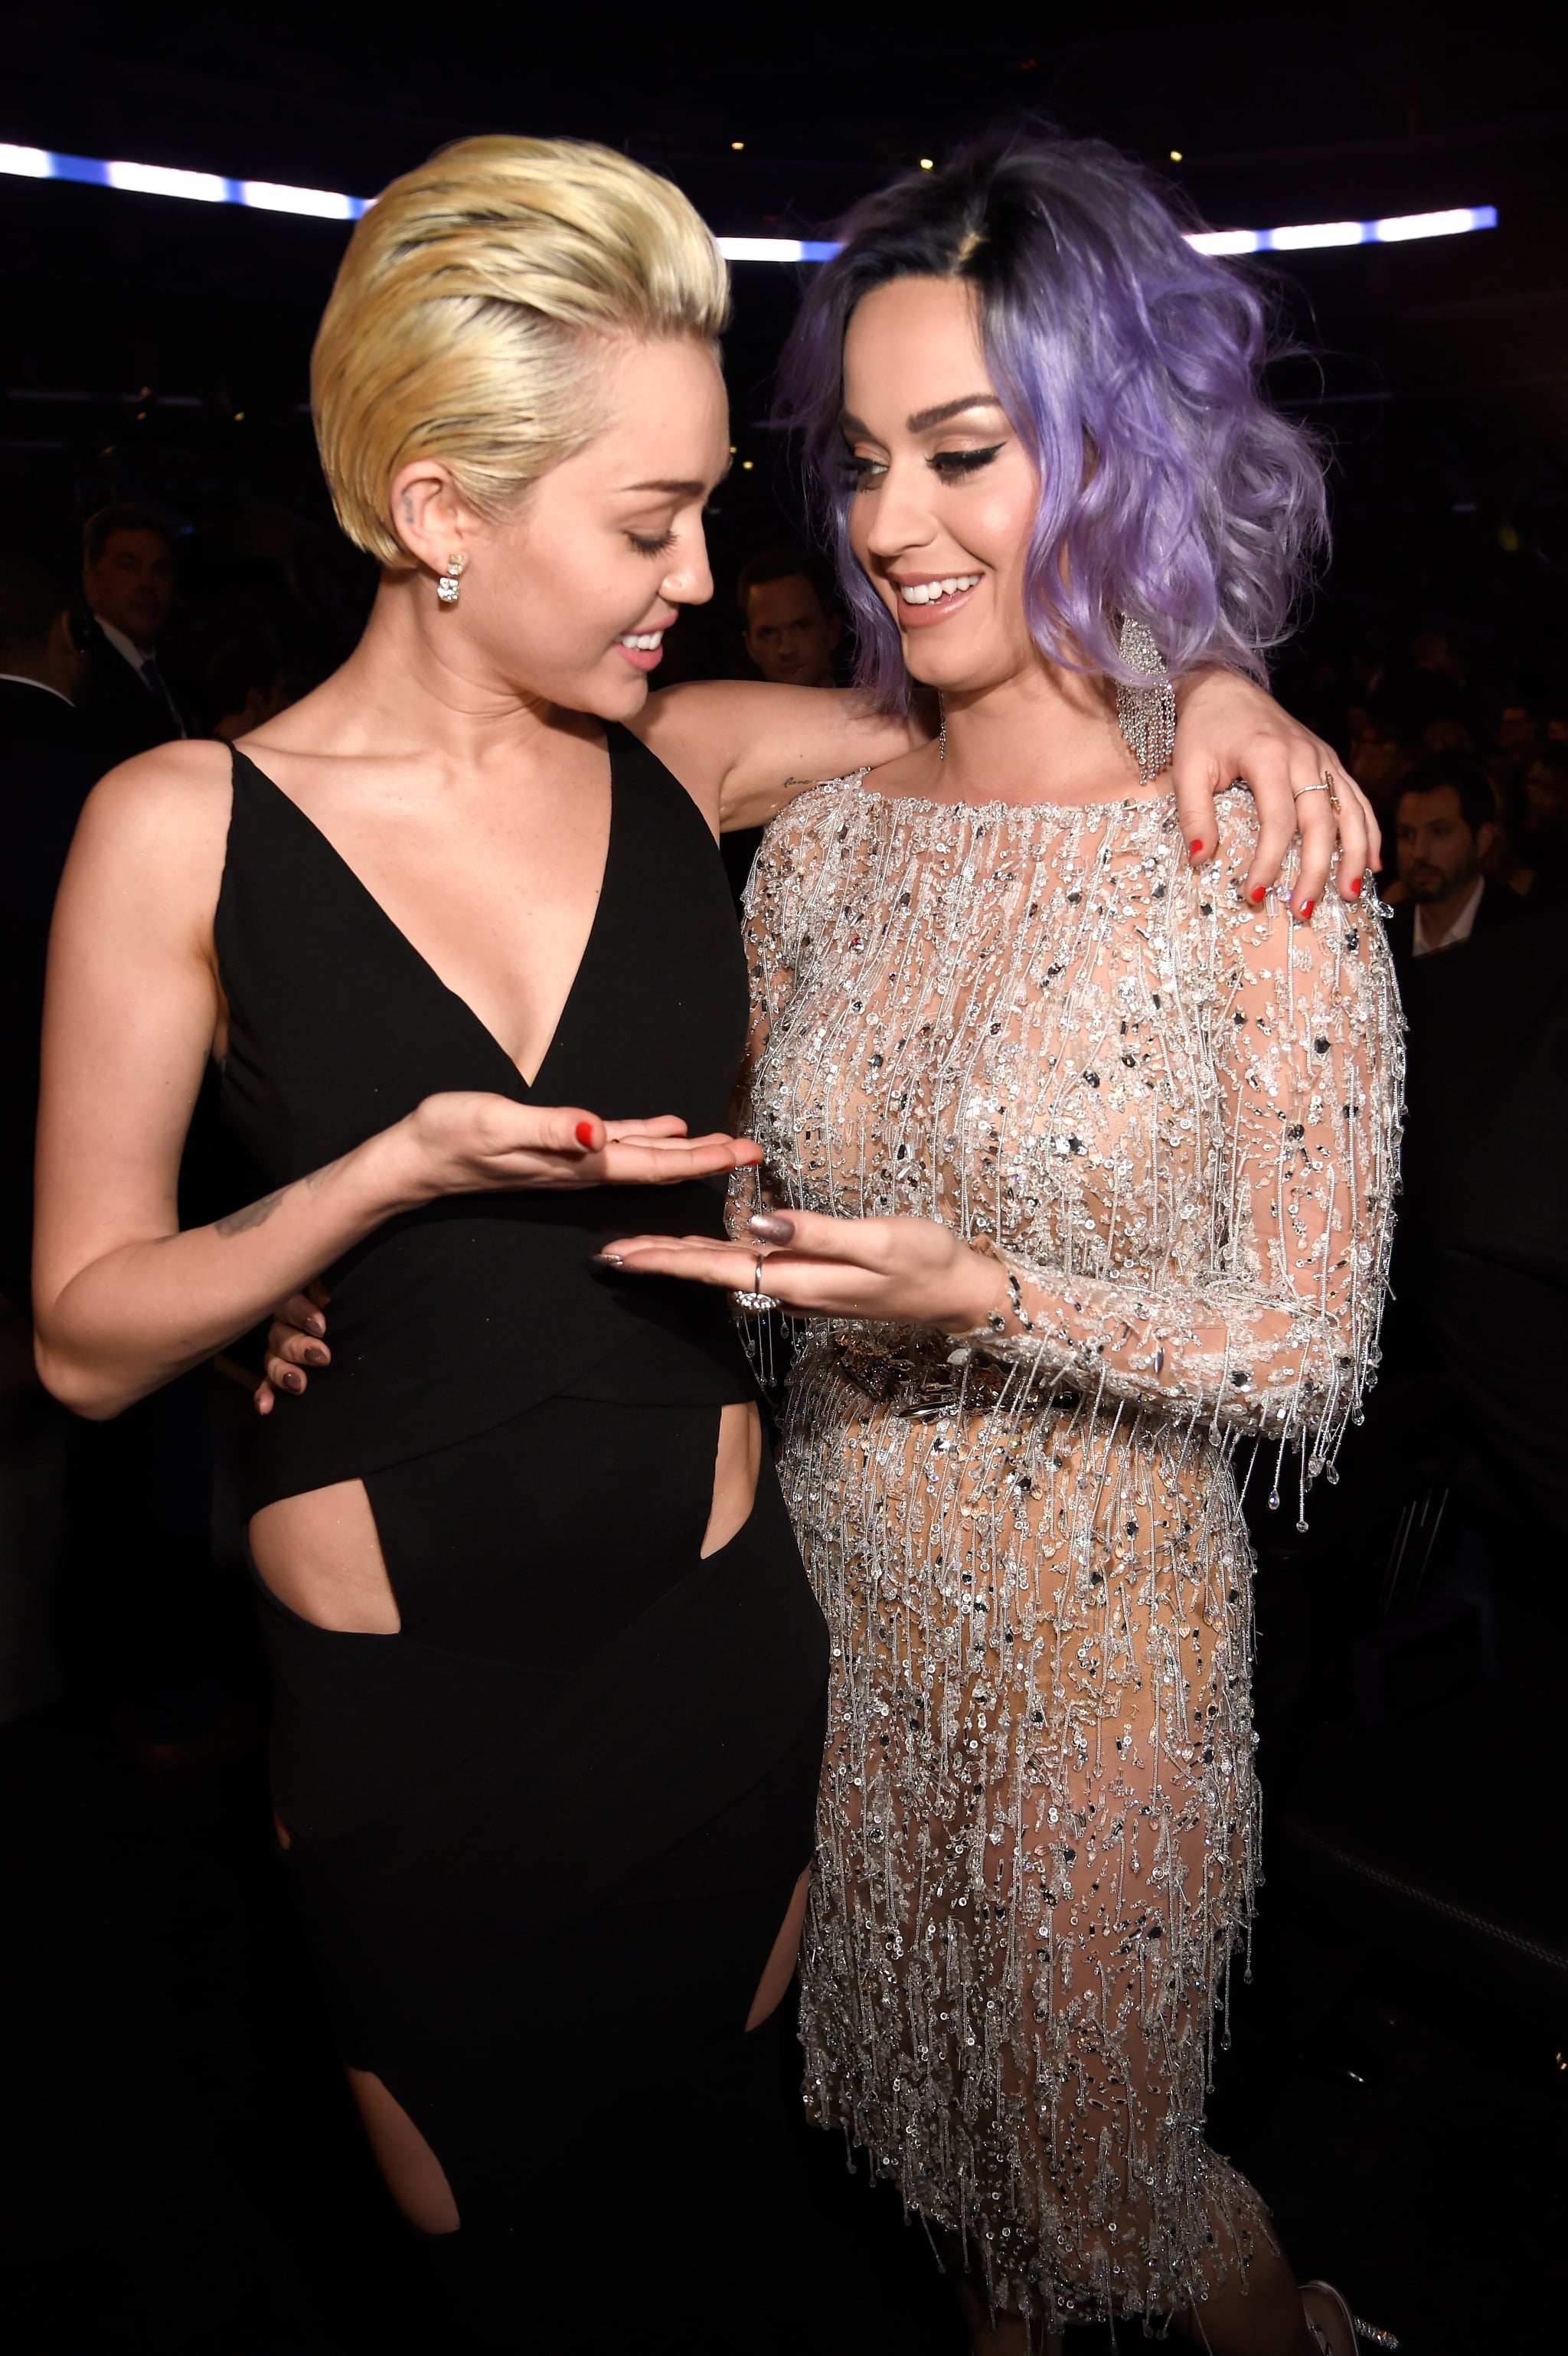 Katy Perry and Miley Cyrus compared cleavage in 2015.